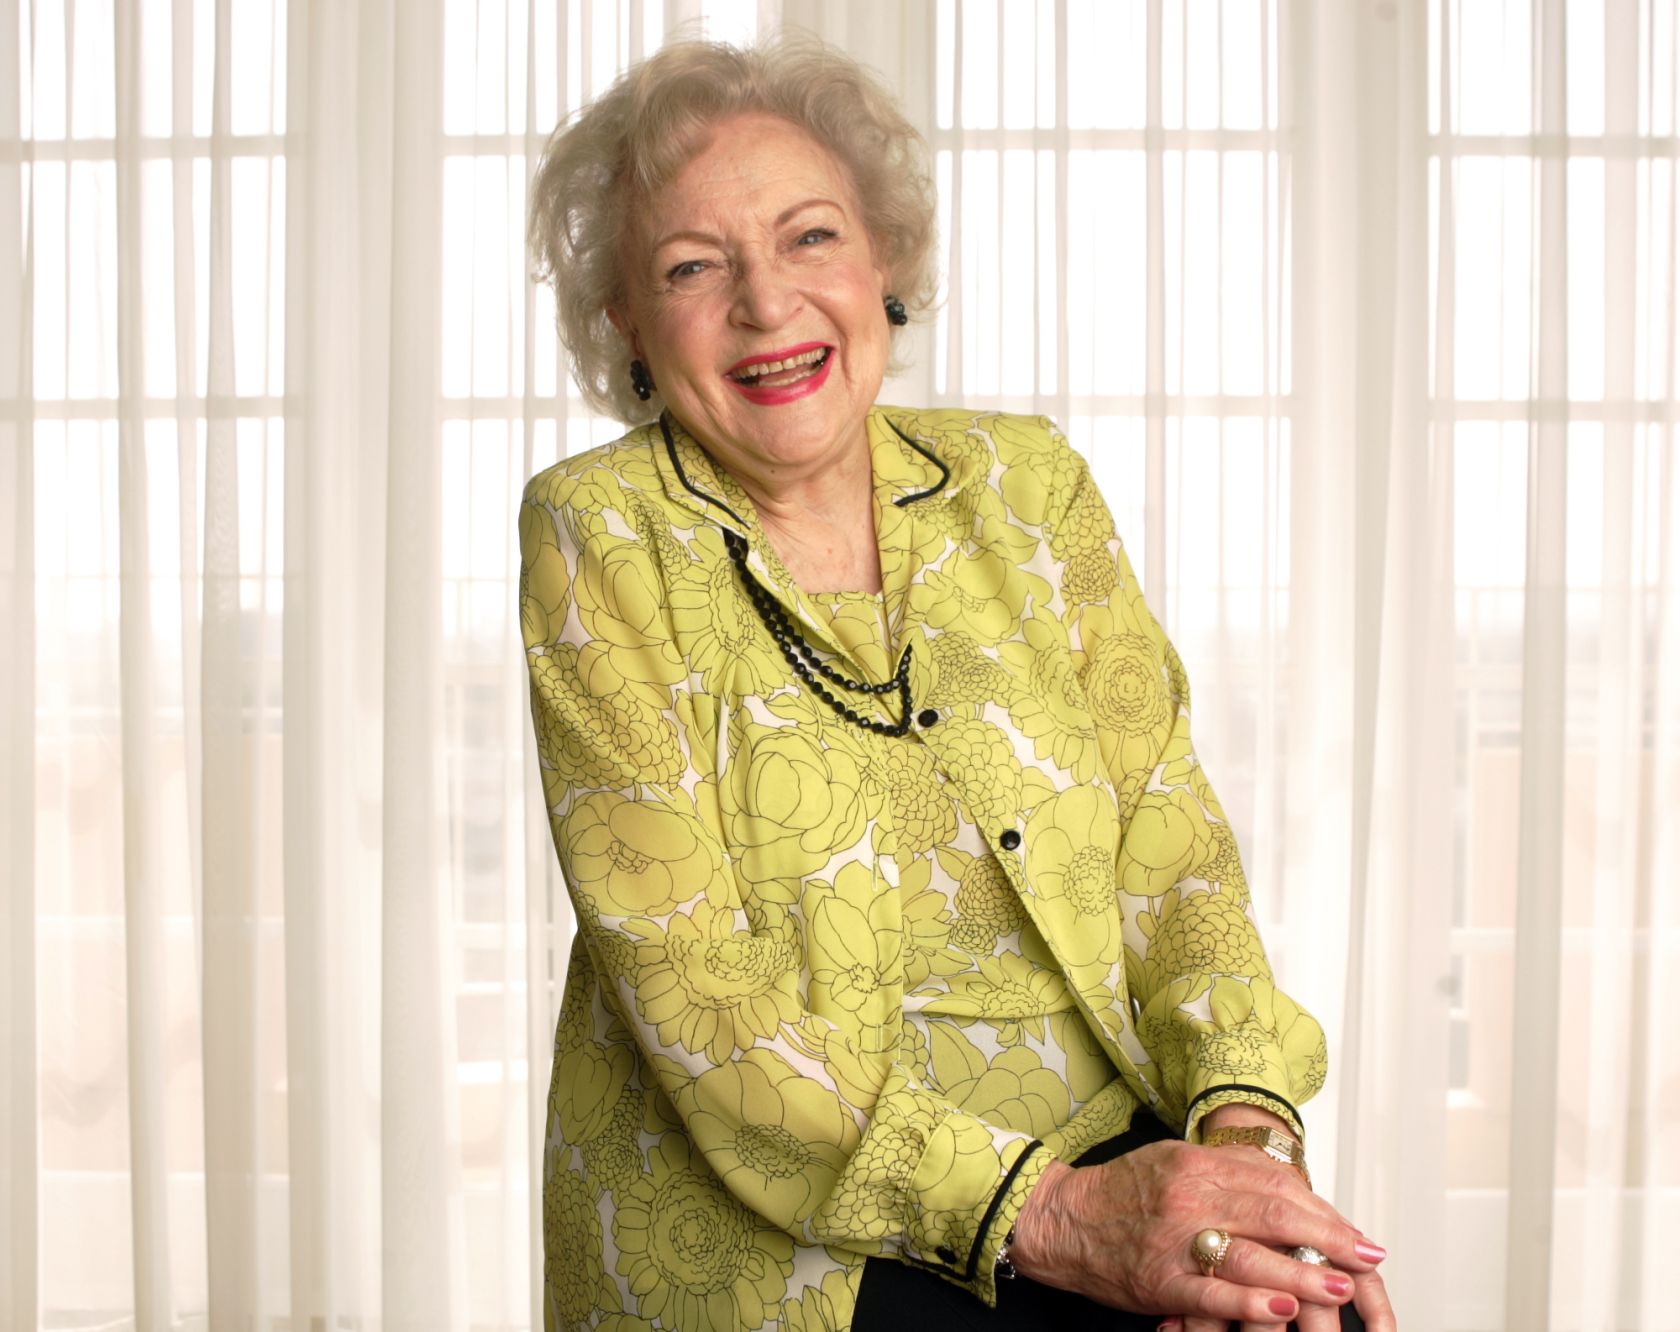 Betty White at 87 has done just about everything you can in Hollywood, She is in a new movie called